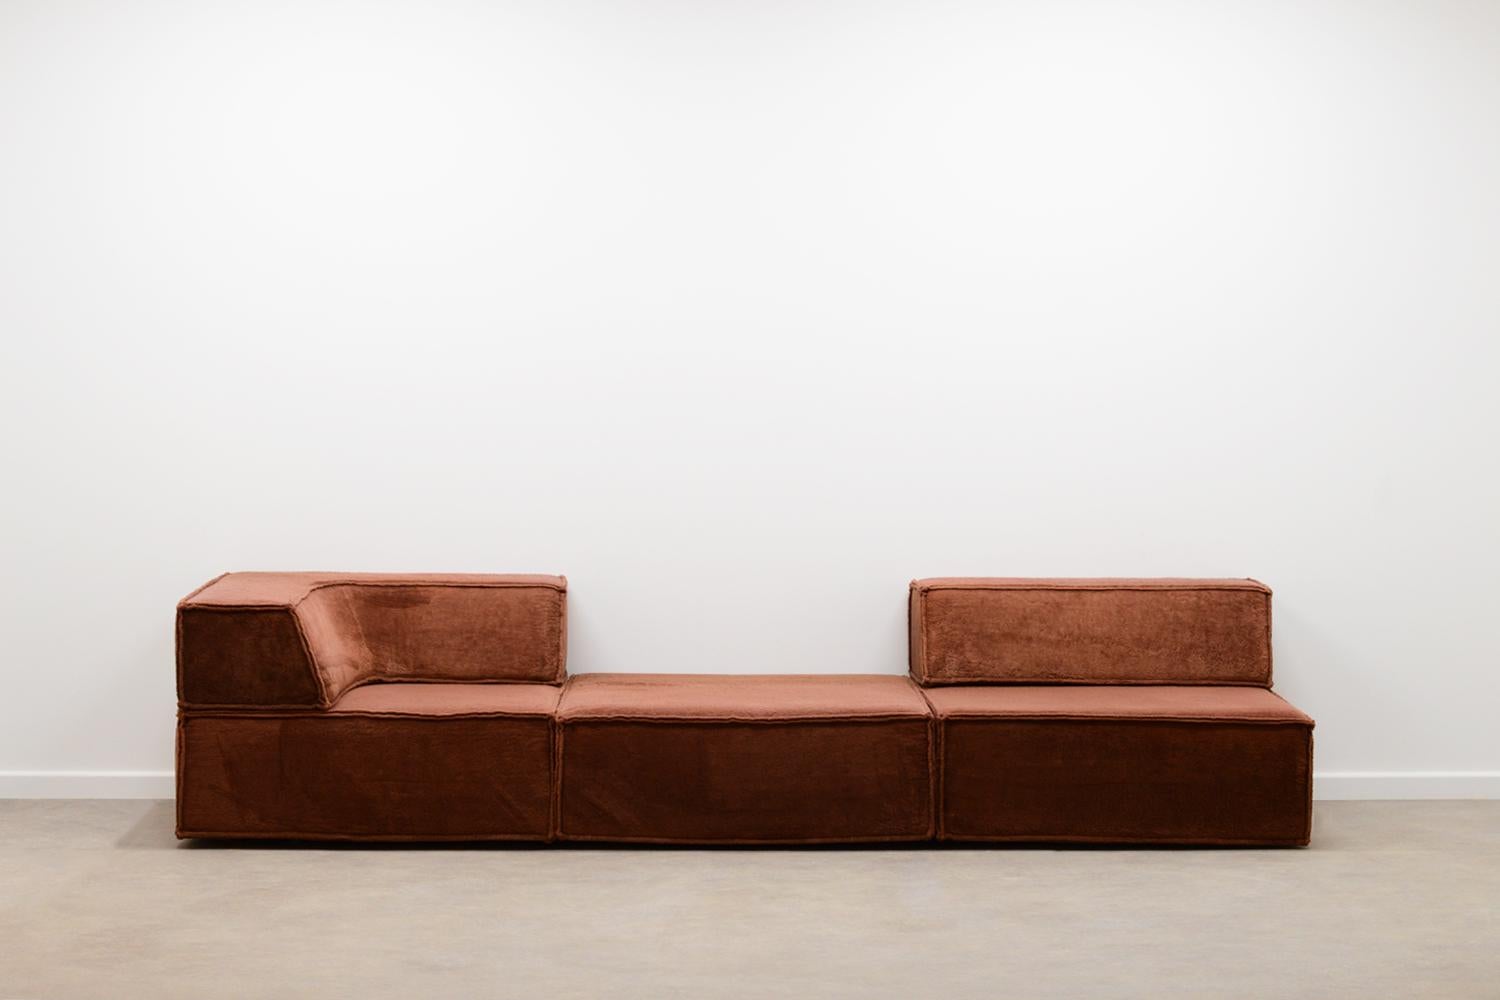 Trio sofa by Team Form AG for Cor Germany, 70s. A 3-piece modular sofa that can be placed as you wish. Soft lounge seat and in its original teddy fabric. In good vintage condition. 

